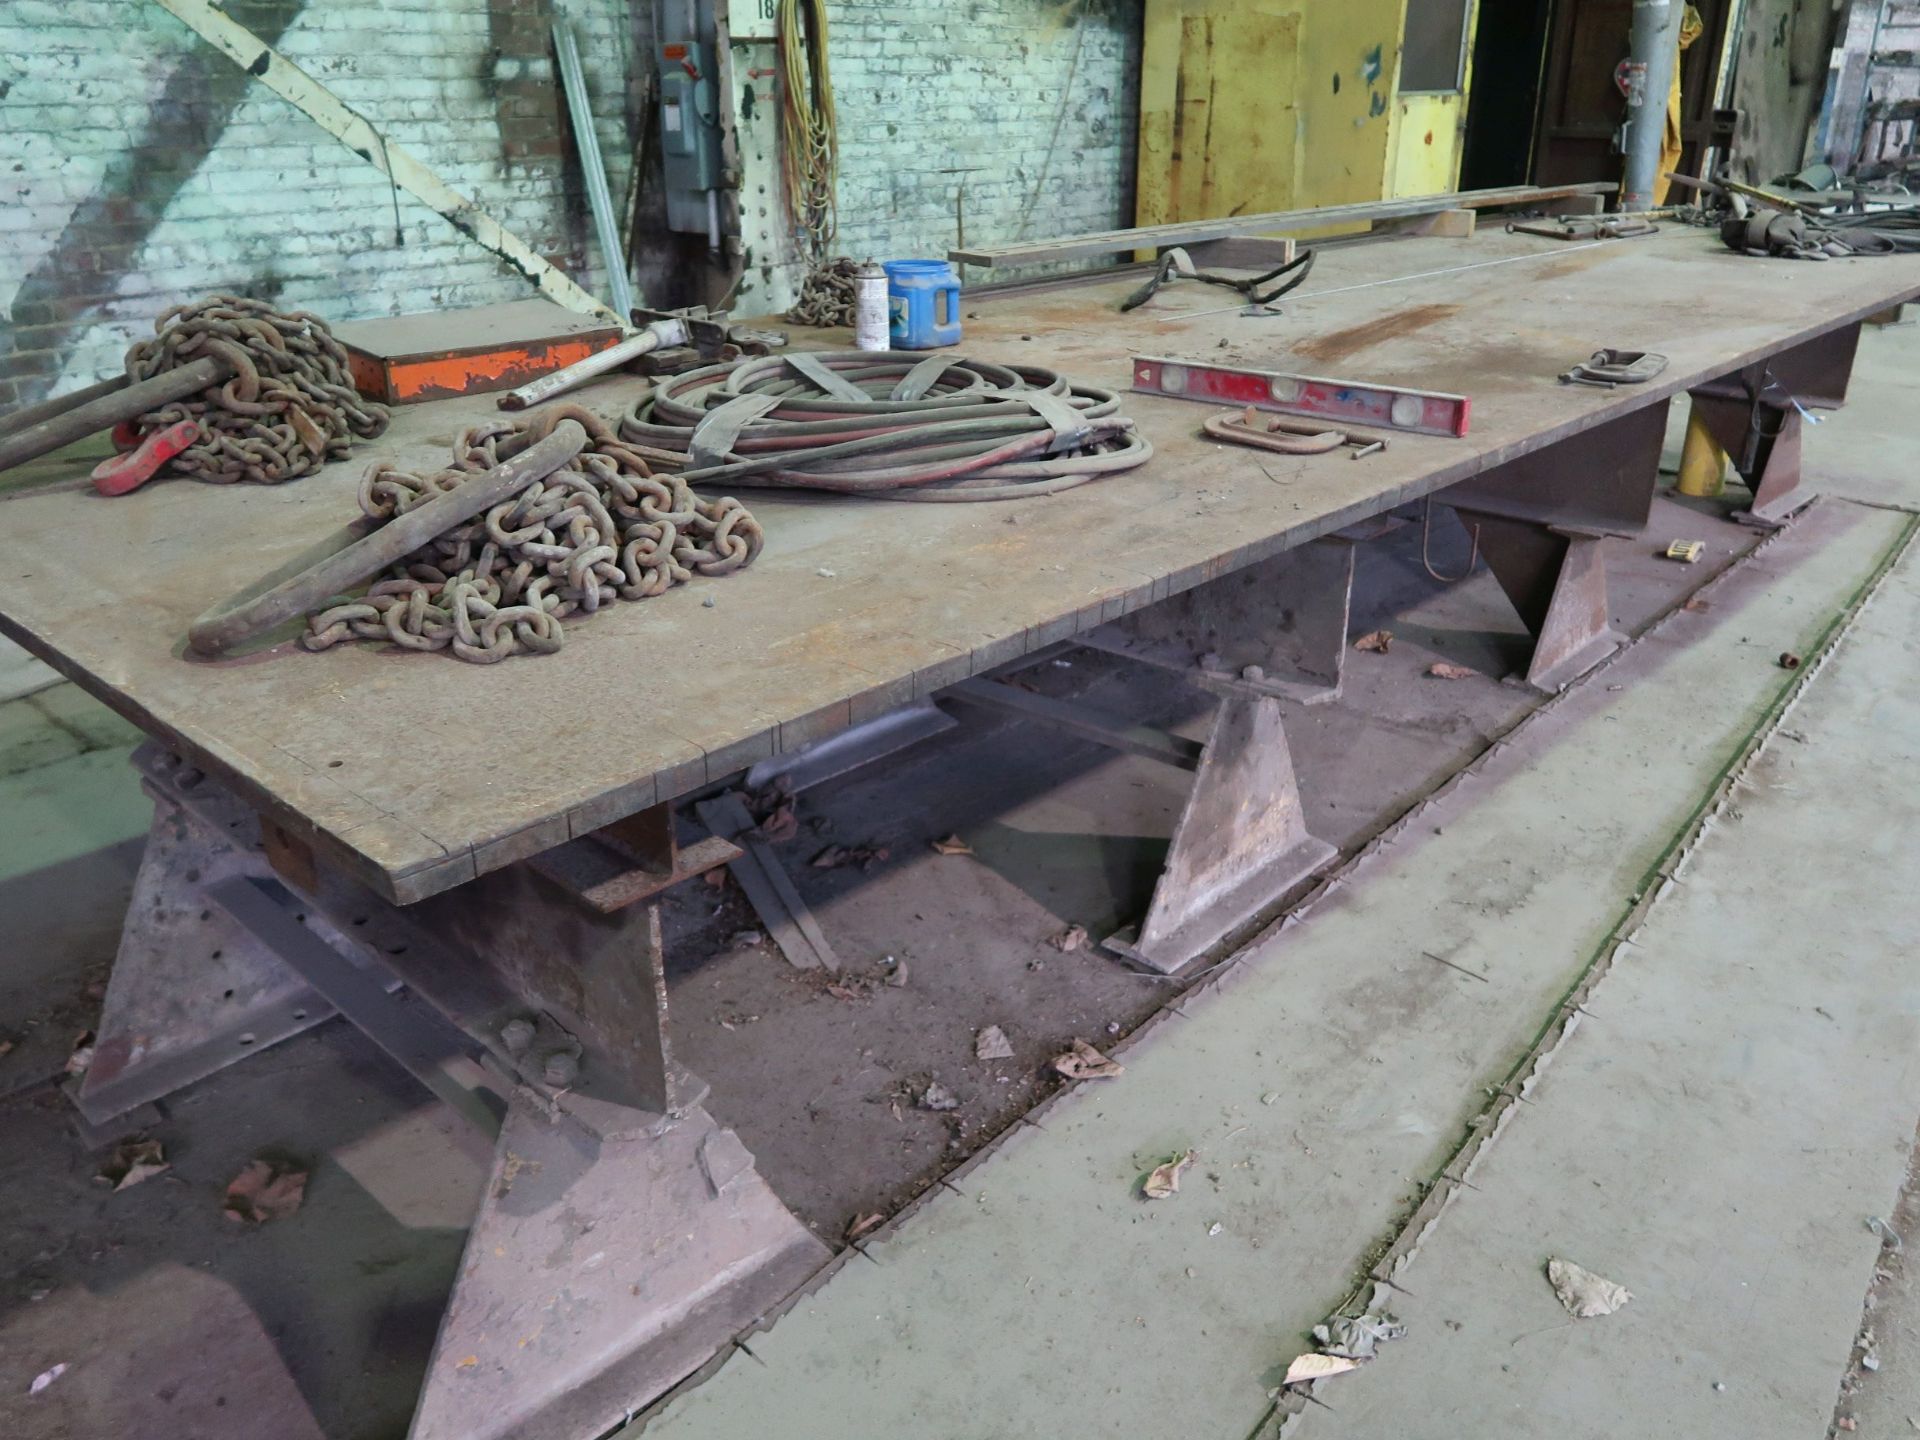 6' X 20' X 1" THICK TOP HD WELDING TABLE WITH CONTENTS (NO SHEAR BLADES) - Image 4 of 4